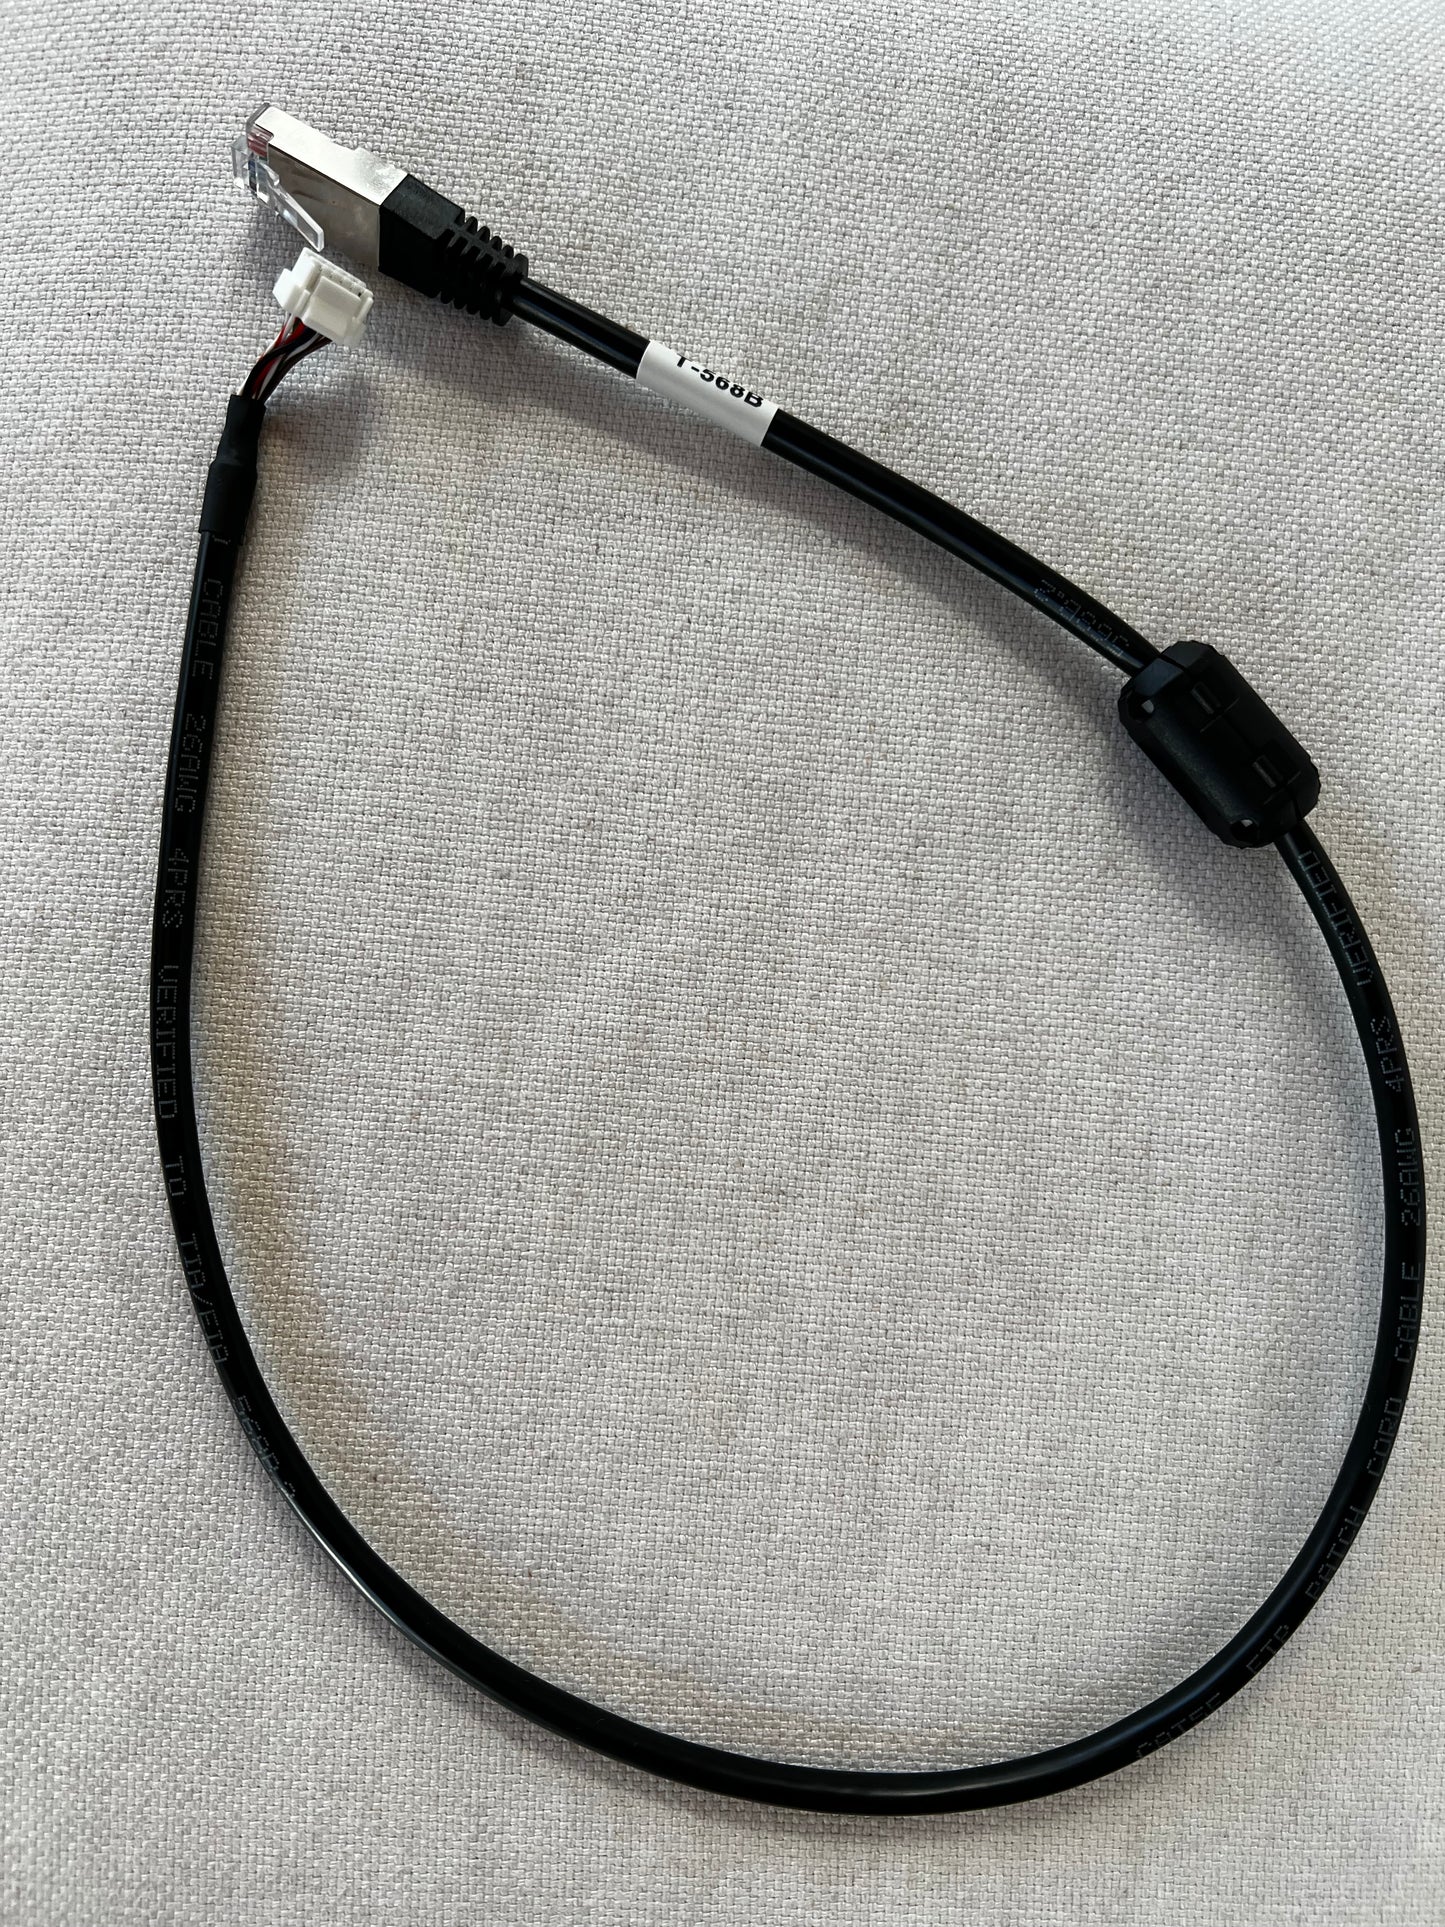 Starlink T-568B Cable